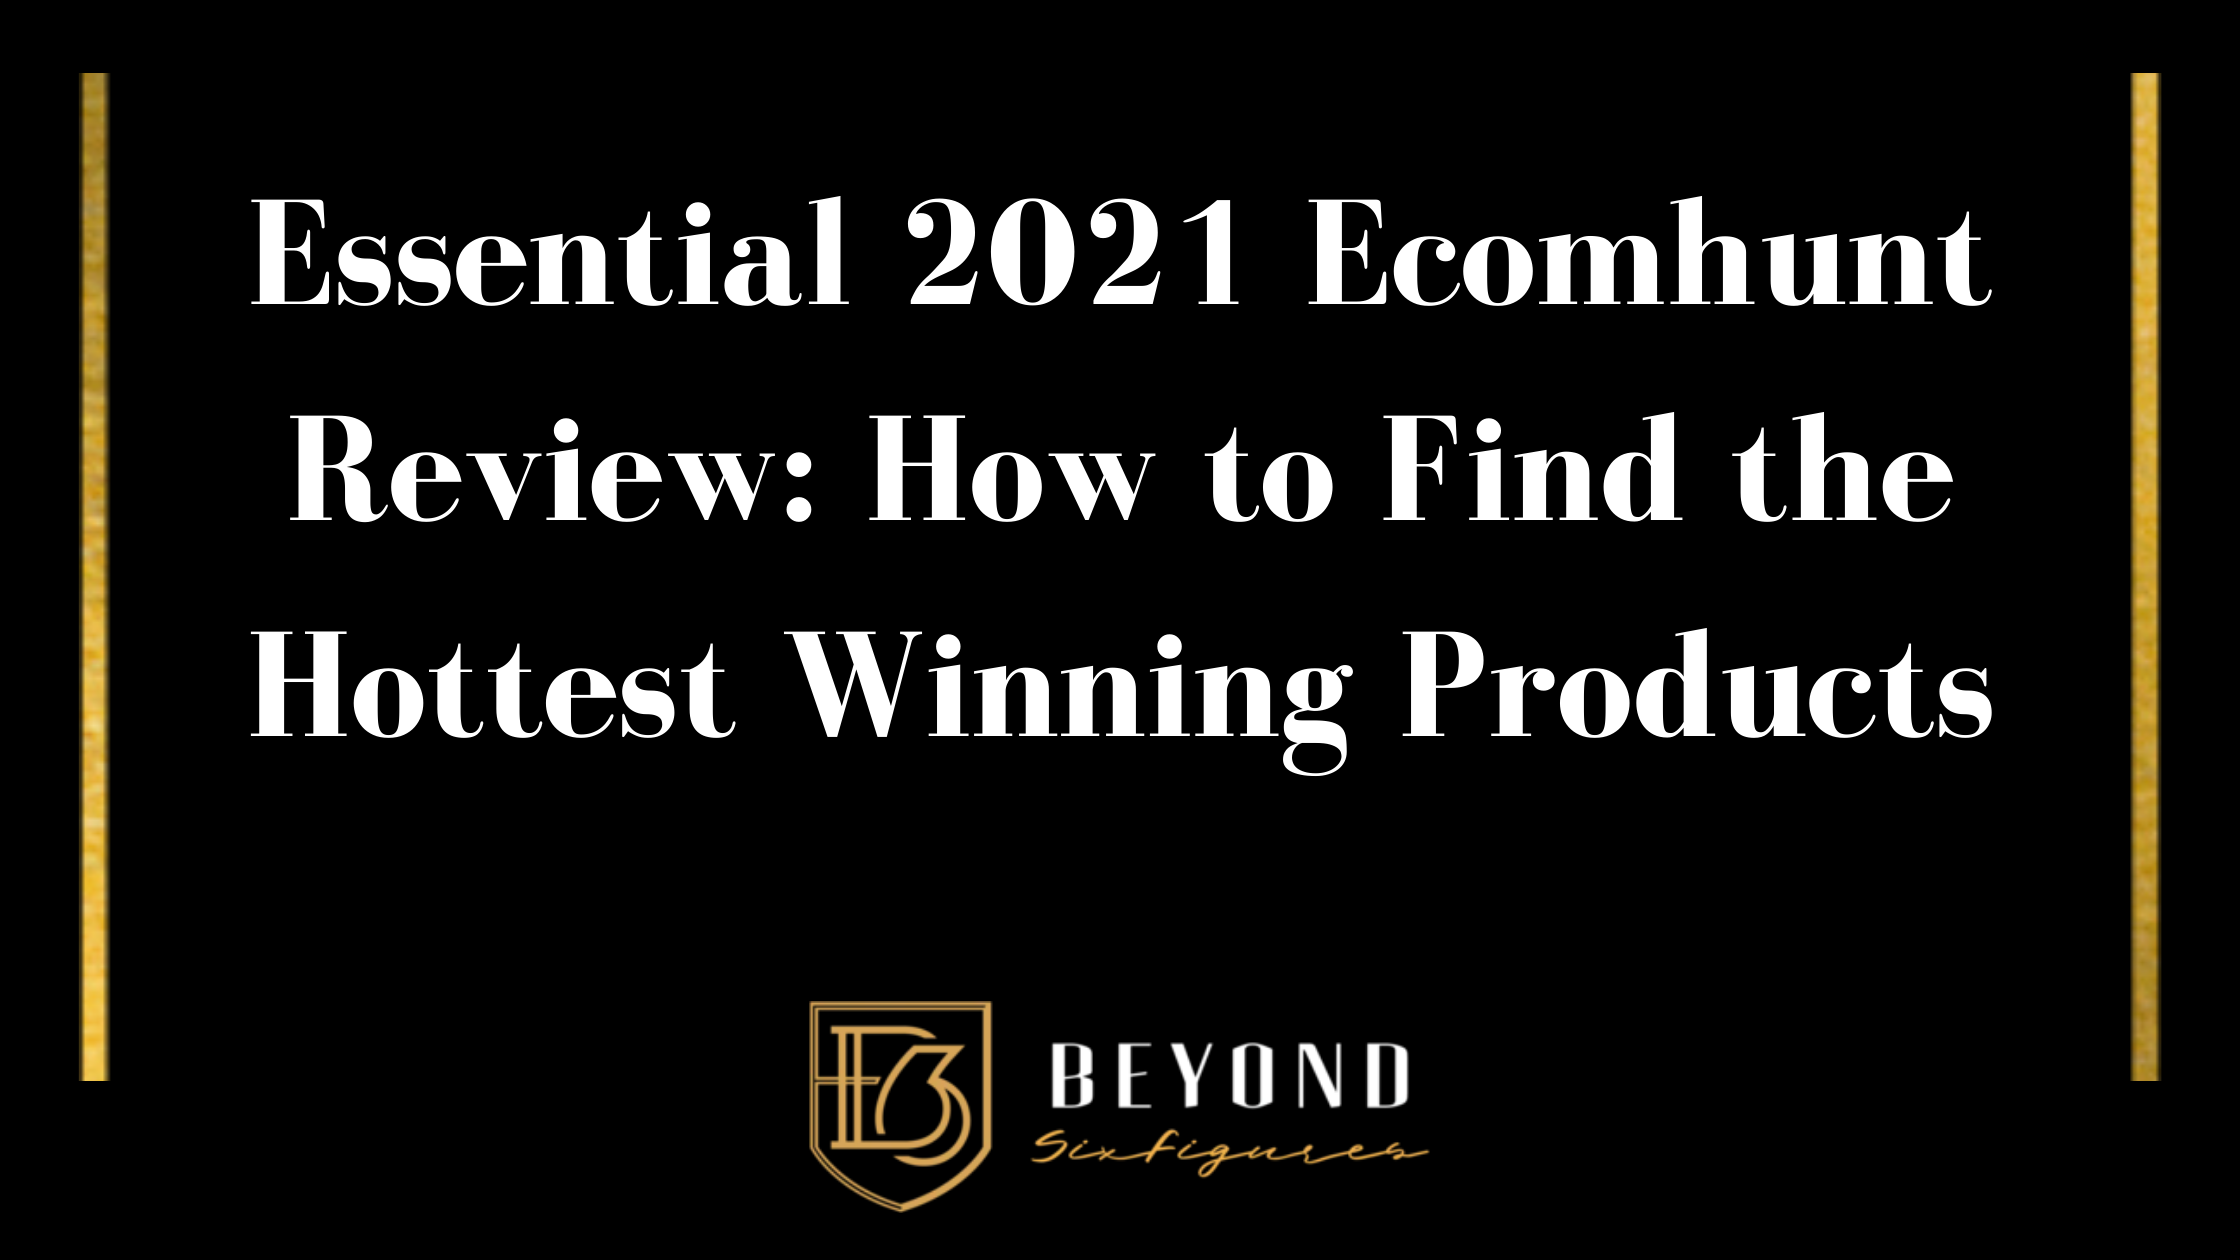 Blog Cover - Essential 2021 Ecomhunt Review: How to Find the Hottest Winning Products